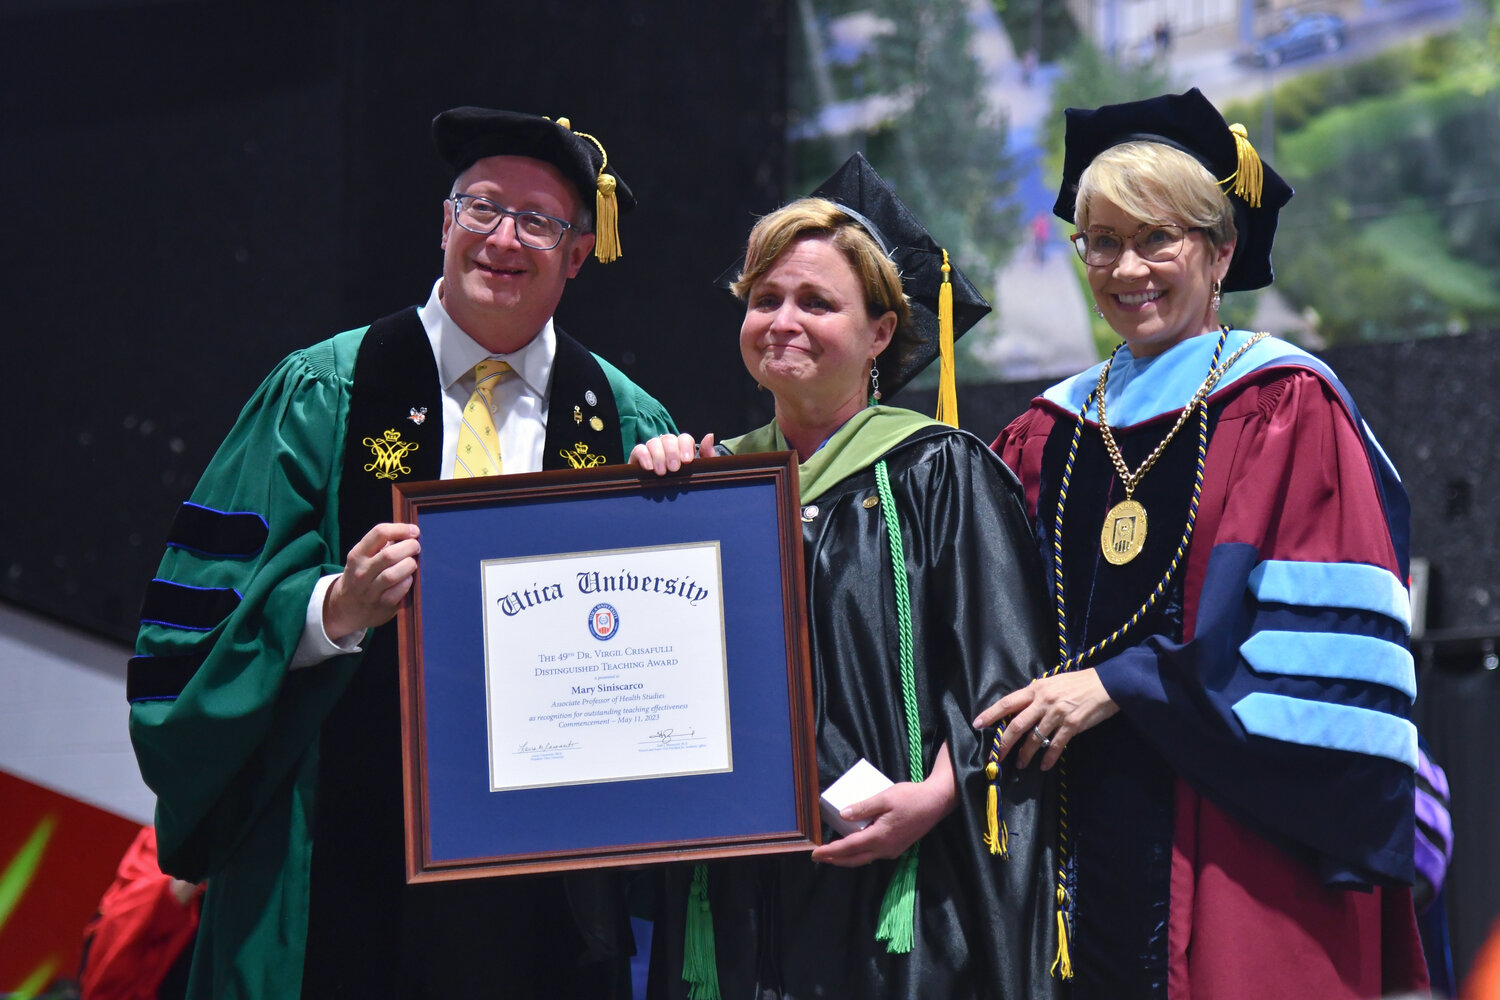 Mary Siniscarco, associate professor of health studies, was joined by Utica University President Laura Casamento and Provost Todd Pfannestiel, as she was awarded the 49th Dr. Virgil Crisafulli Distinguished Teaching Award, a recognition for outstanding teaching effectiveness.